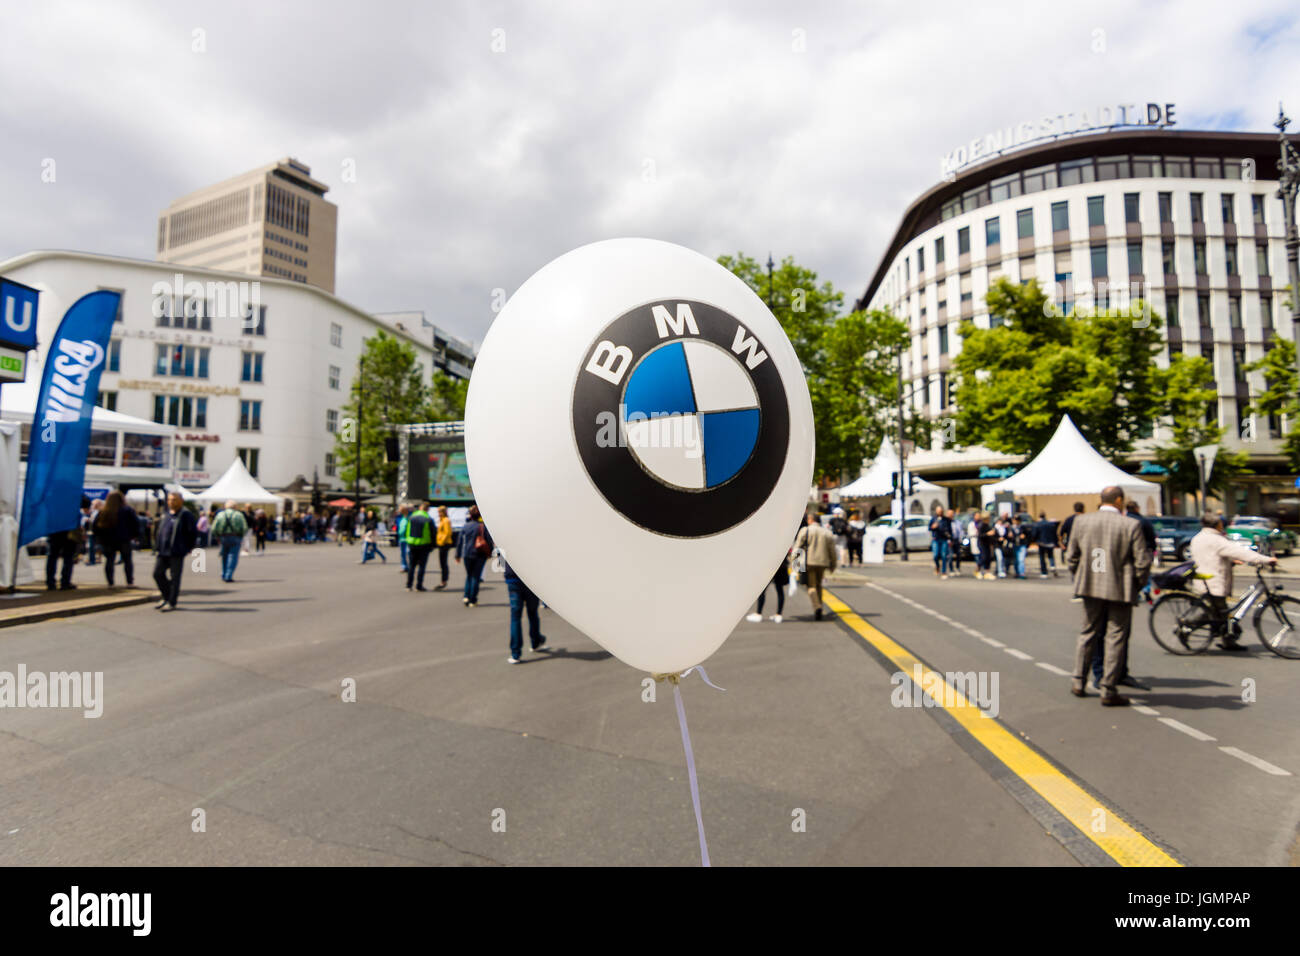 The symbol of BMW on a balloon. Stock Photo